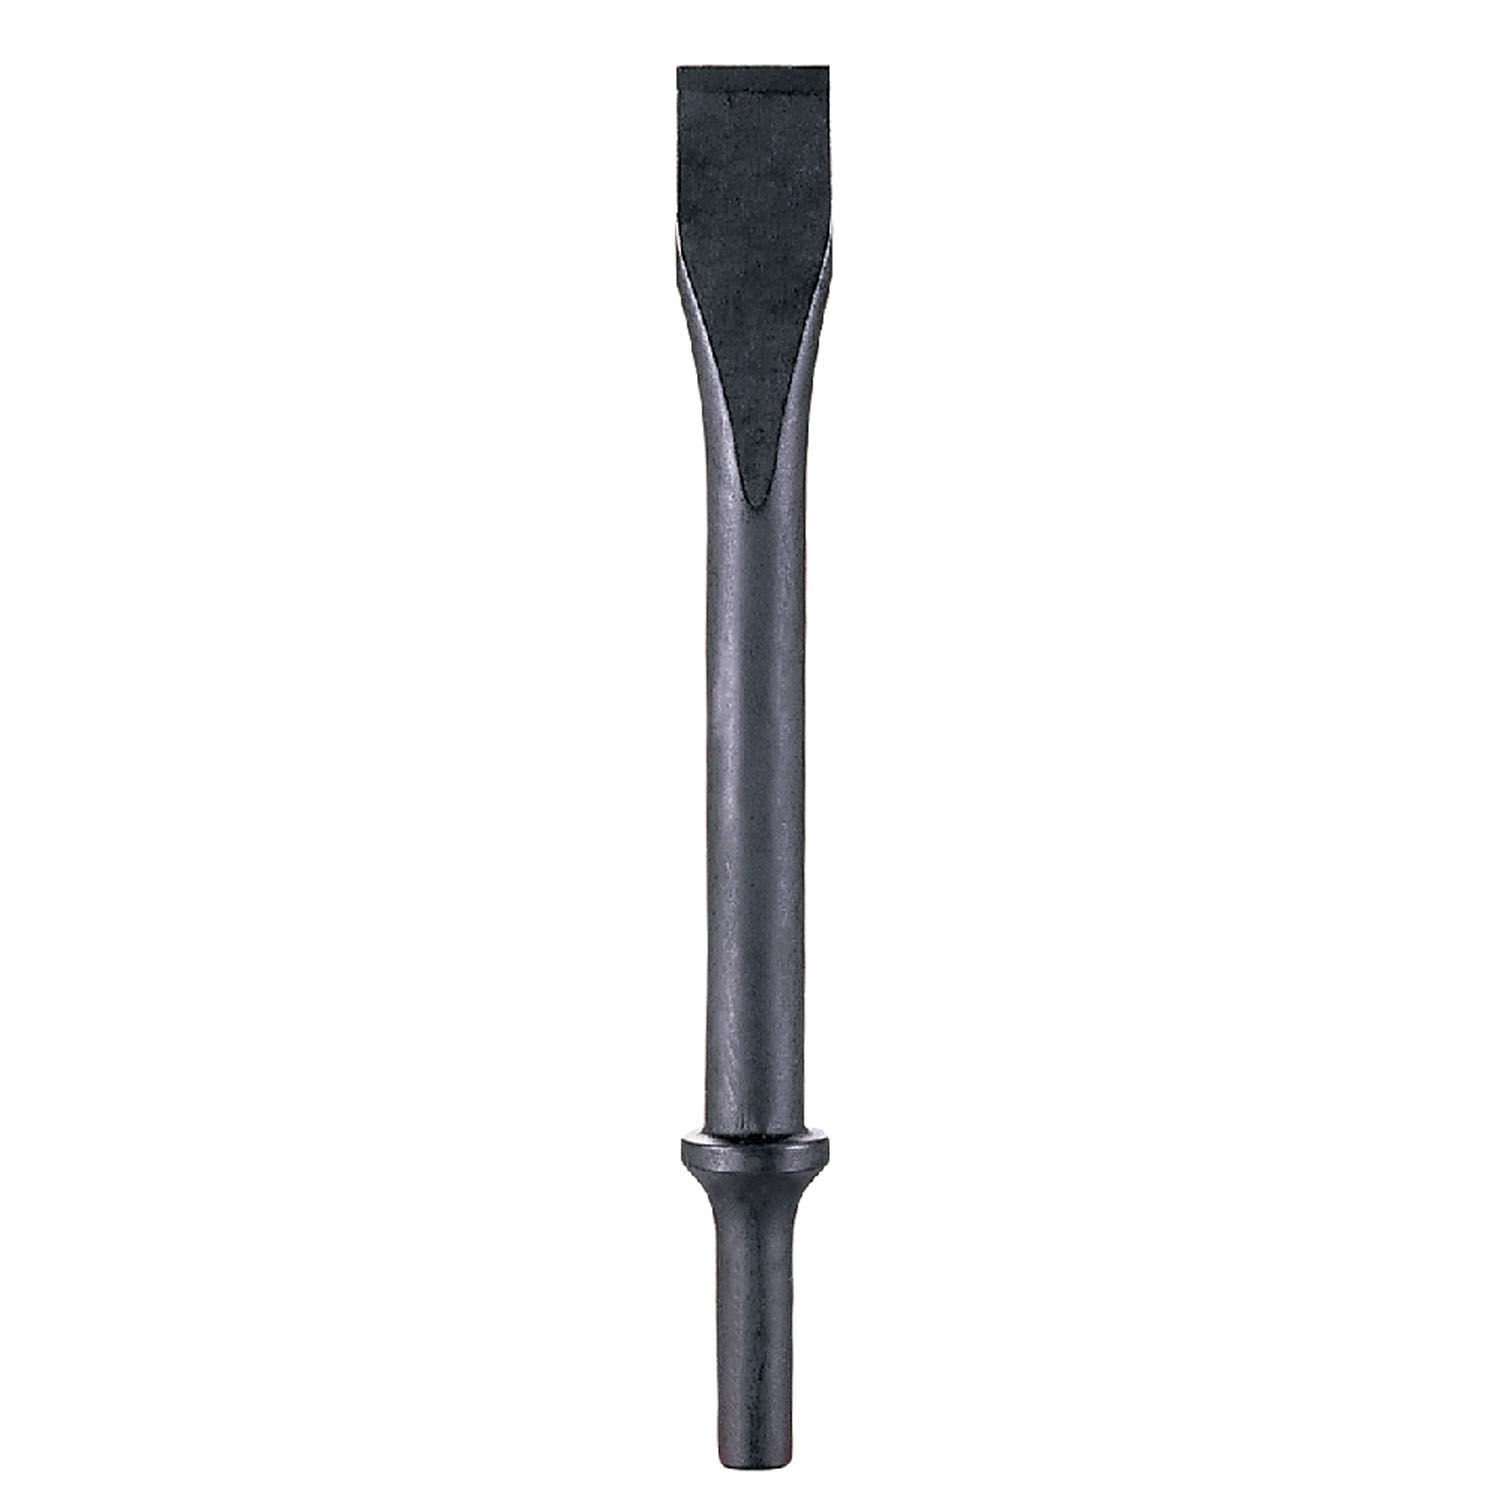 FLAT CHISEL 0.401 FOR AIR HAMMER (MULTIPLE SIZES AVAILABLE)